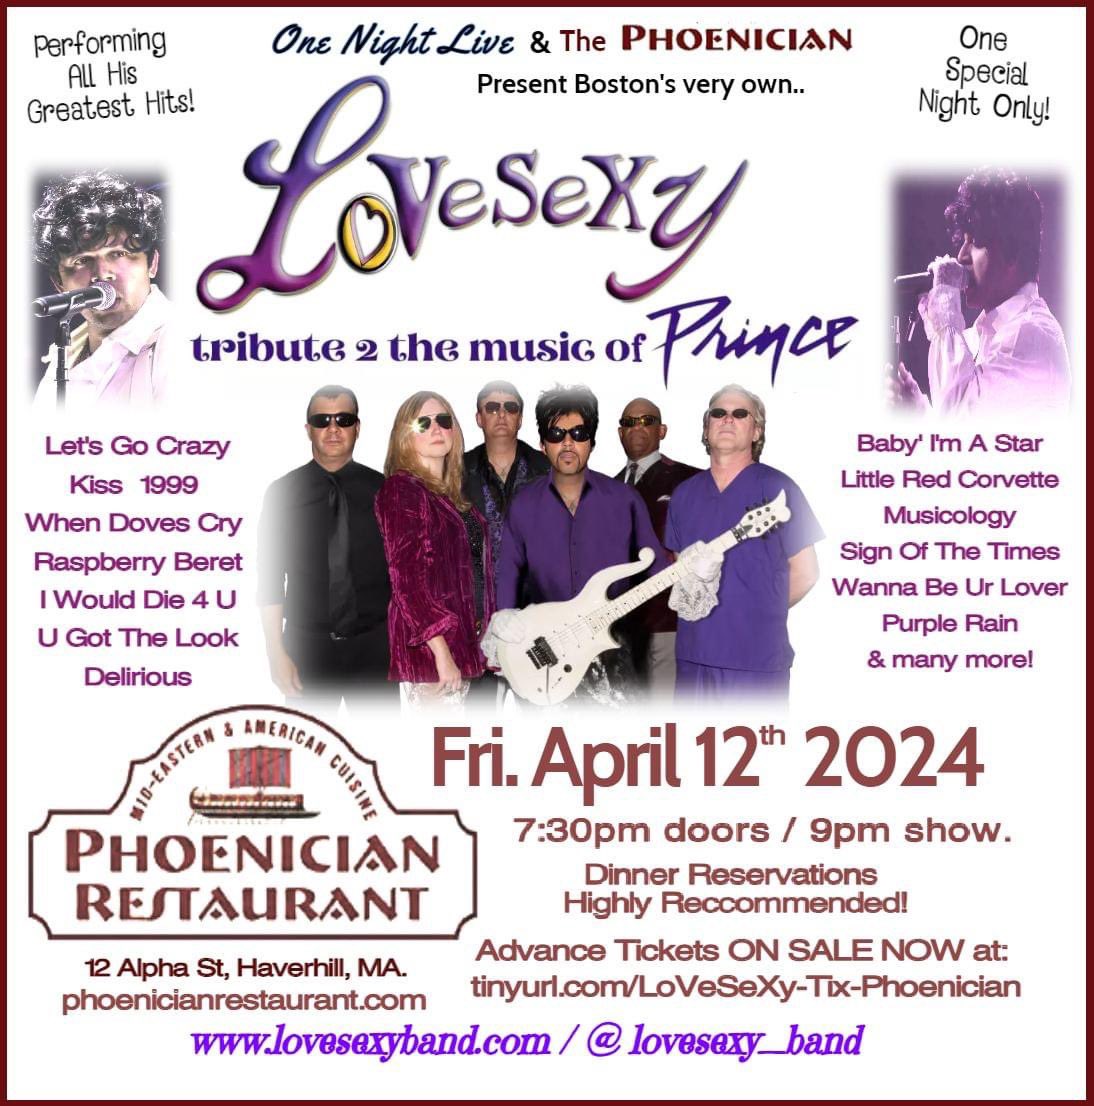 LoVeSeXy, New England's Premier tribute 2 PRINCE at The Phoenician on 4/12/24. Only April appearance. Get Your Tix Now!! tinyurl.com/LoVeSeXy-Tix-P…